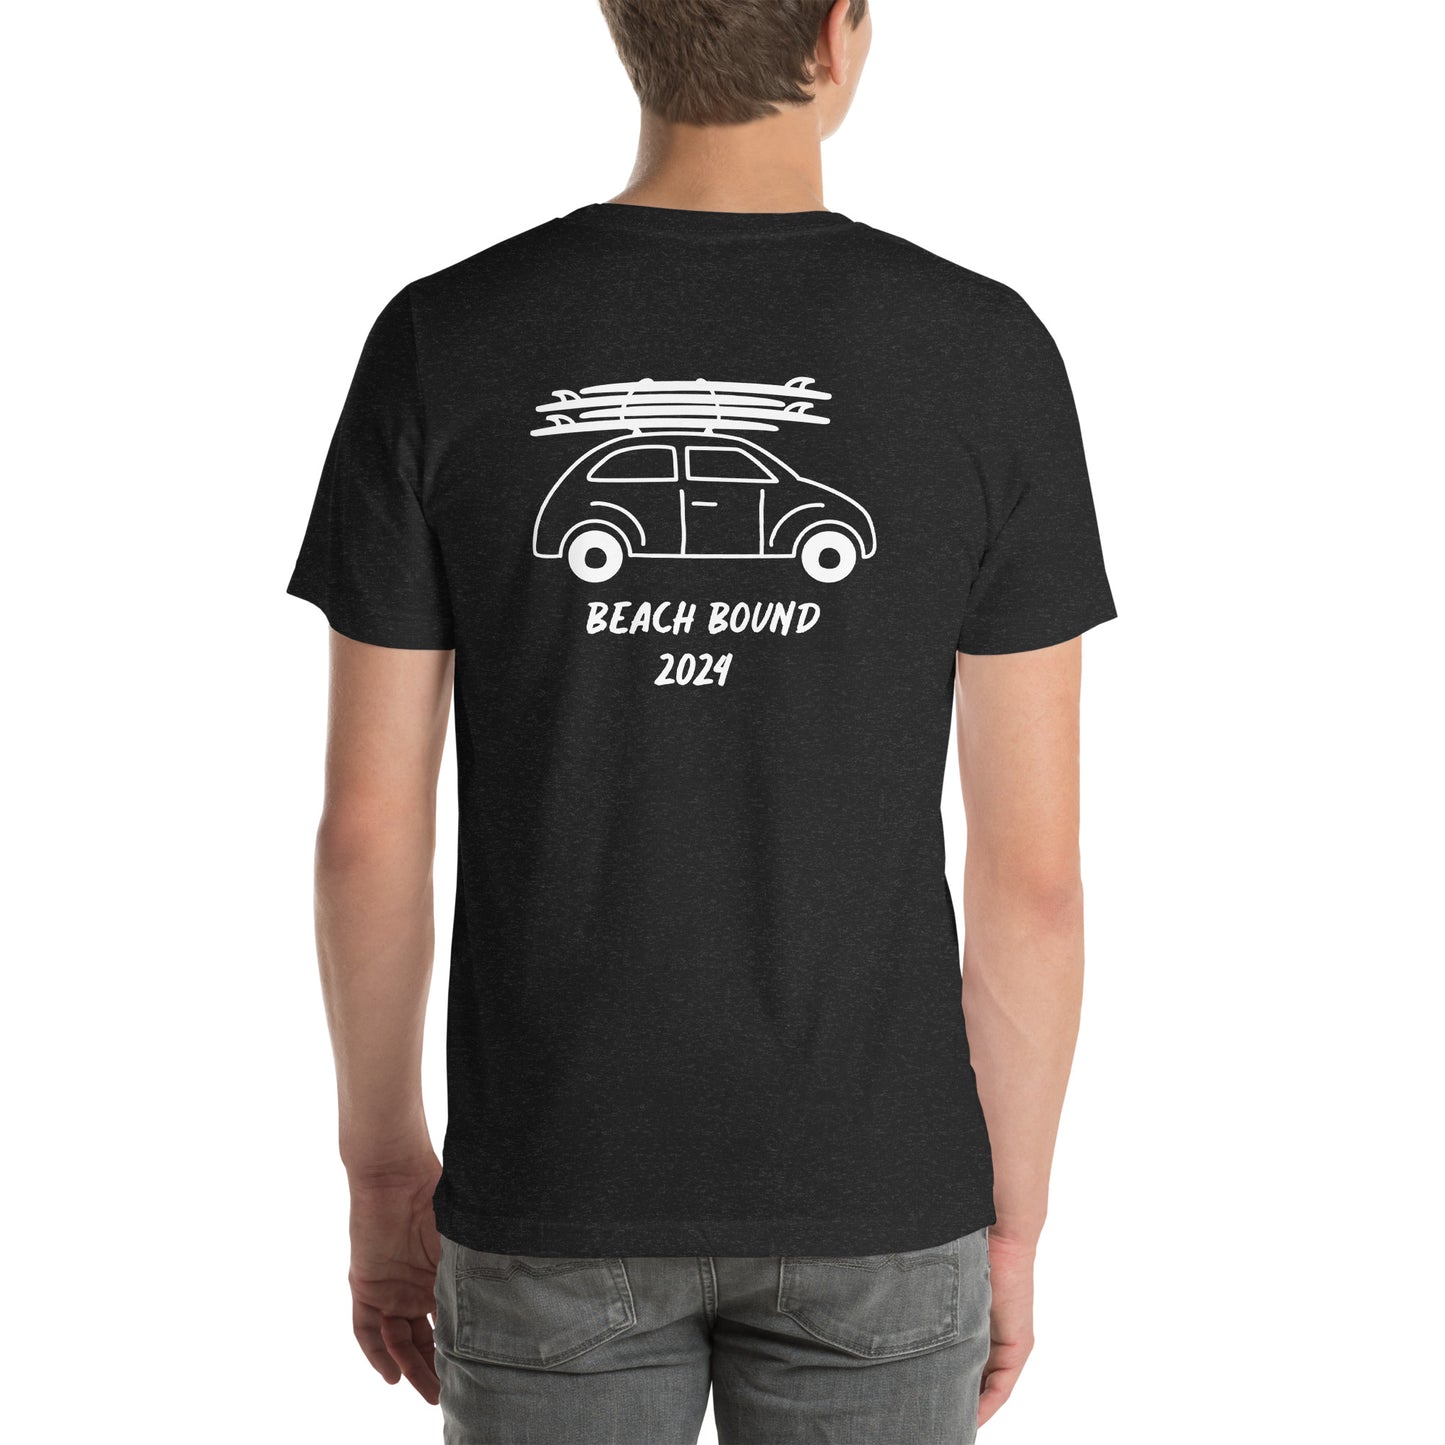 Beach Bound this Summer in the Adult Unisex T-Shirt